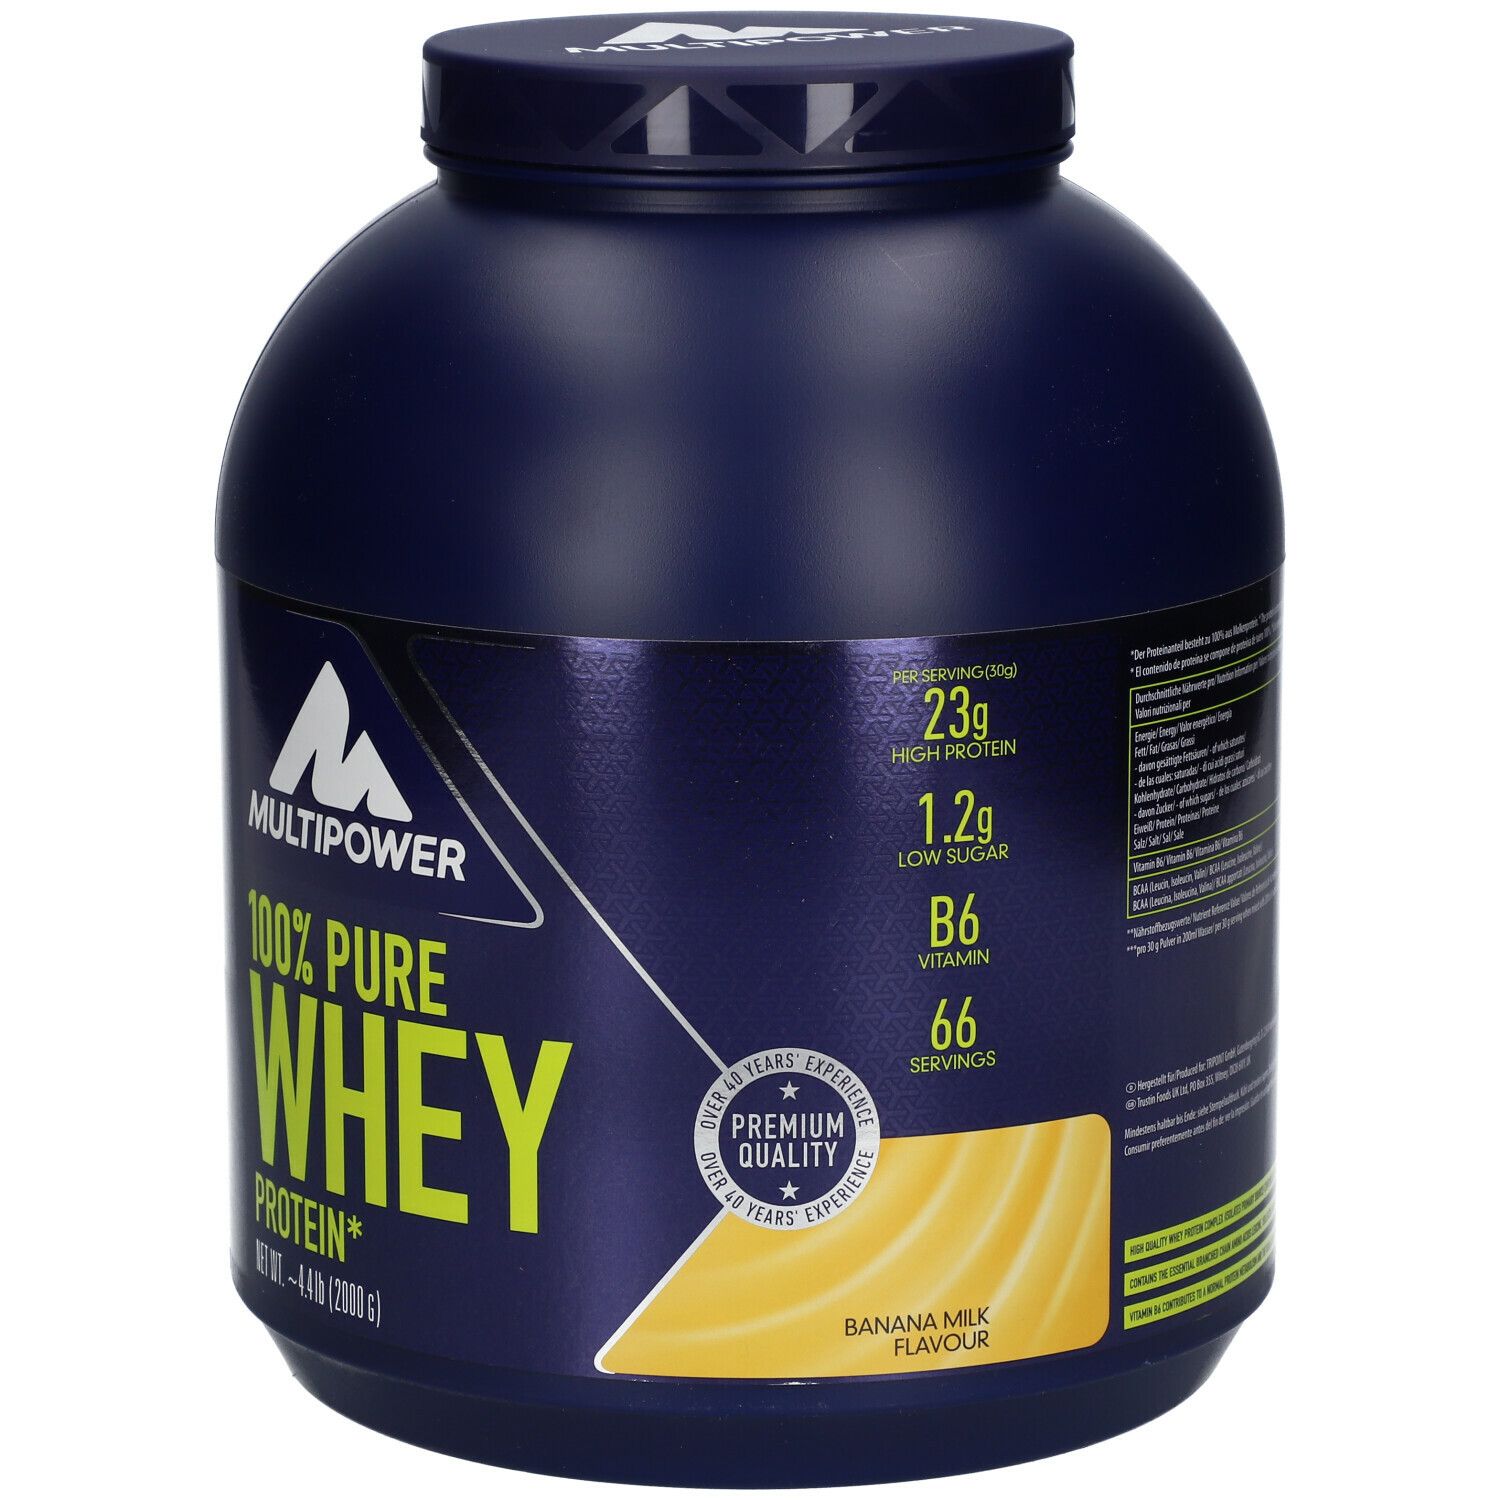 MULTIPOWER 100% PURE WHEY PROTEIN